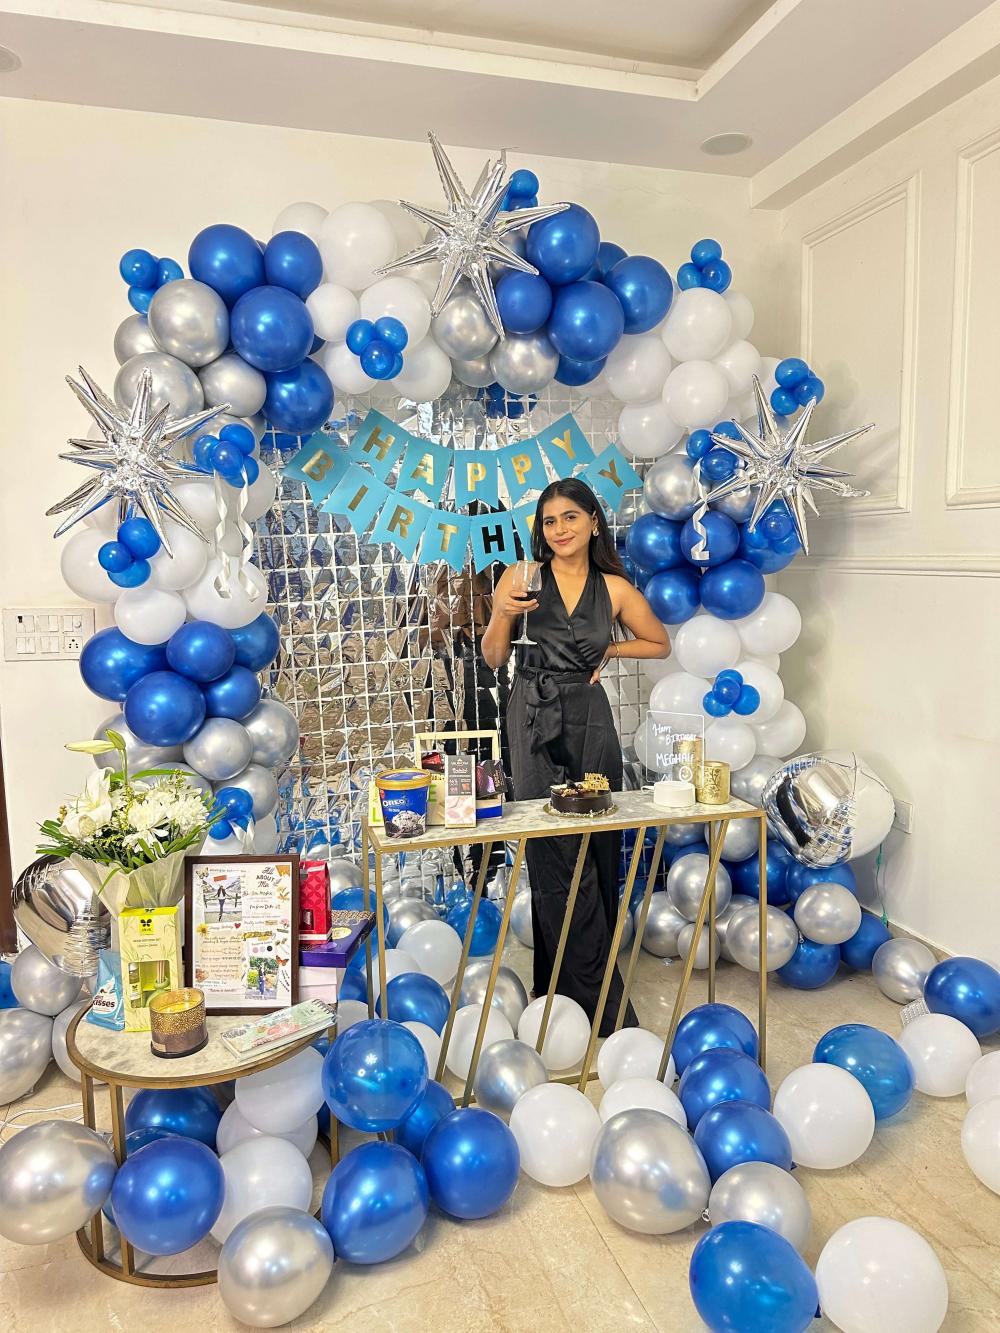 Transform your space into a celebration hub with our Premium Blue Bliss Gala Decorations, perfect for creating memories and capturing lively photographs with loved ones.